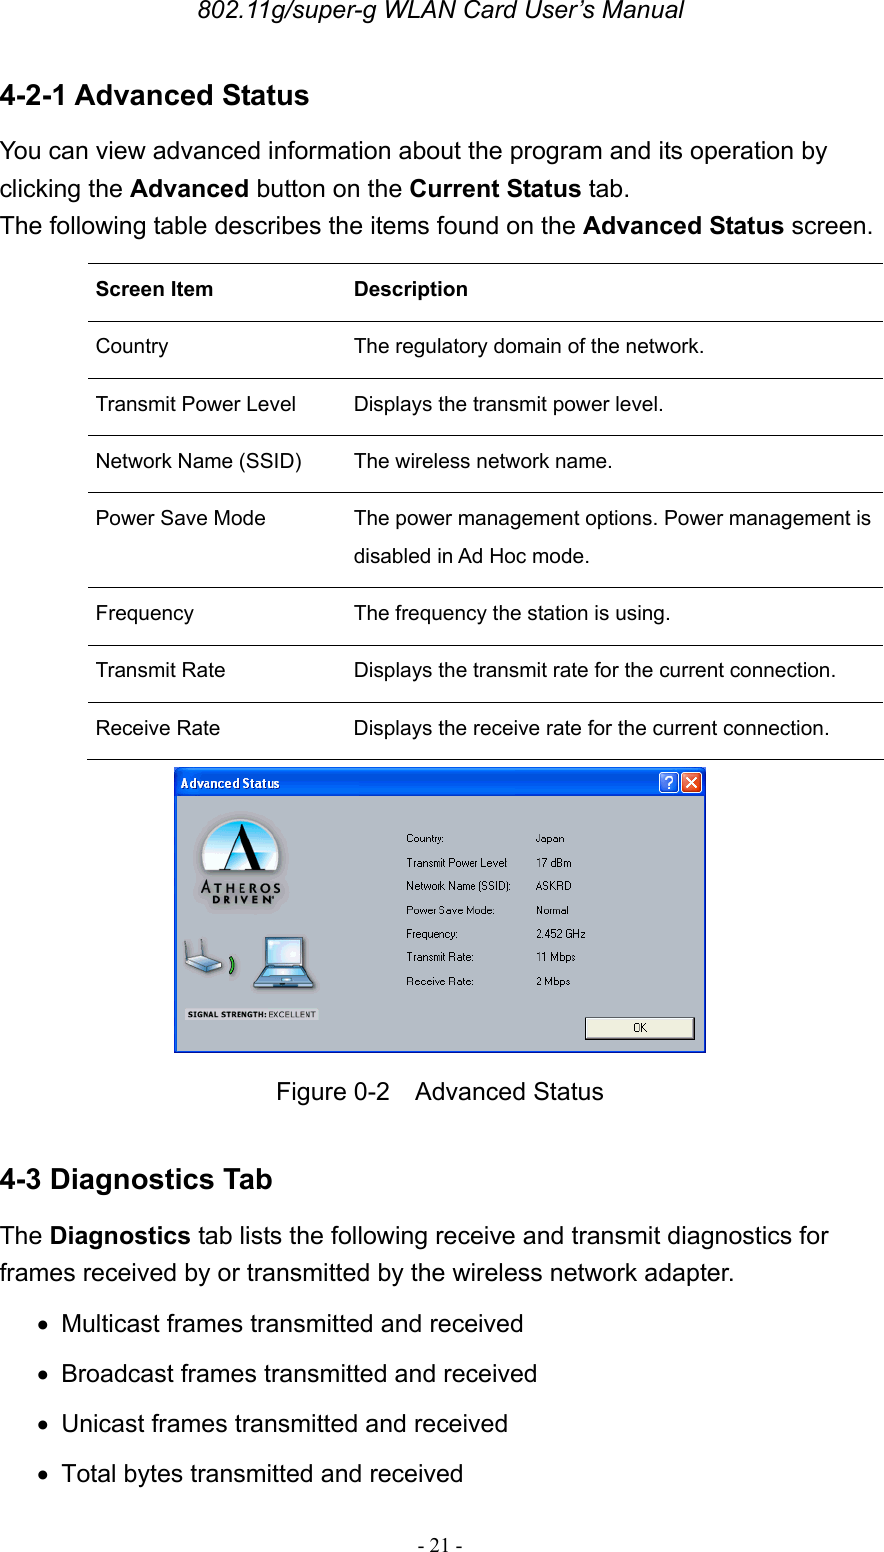 802.11g/super-g WLAN Card User’s Manual - 21 - 4-2-1 Advanced Status You can view advanced information about the program and its operation by clicking the Advanced button on the Current Status tab.   The following table describes the items found on the Advanced Status screen. Screen Item  Description Country The regulatory domain of the network. Transmit Power Level Displays the transmit power level. Network Name (SSID) The wireless network name.  Power Save Mode The power management options. Power management is disabled in Ad Hoc mode. Frequency The frequency the station is using. Transmit Rate  Displays the transmit rate for the current connection. Receive Rate  Displays the receive rate for the current connection.  Figure 0-2  Advanced Status  4-3 Diagnostics Tab The Diagnostics tab lists the following receive and transmit diagnostics for frames received by or transmitted by the wireless network adapter.   •   Multicast frames transmitted and received •   Broadcast frames transmitted and received •   Unicast frames transmitted and received •   Total bytes transmitted and received 